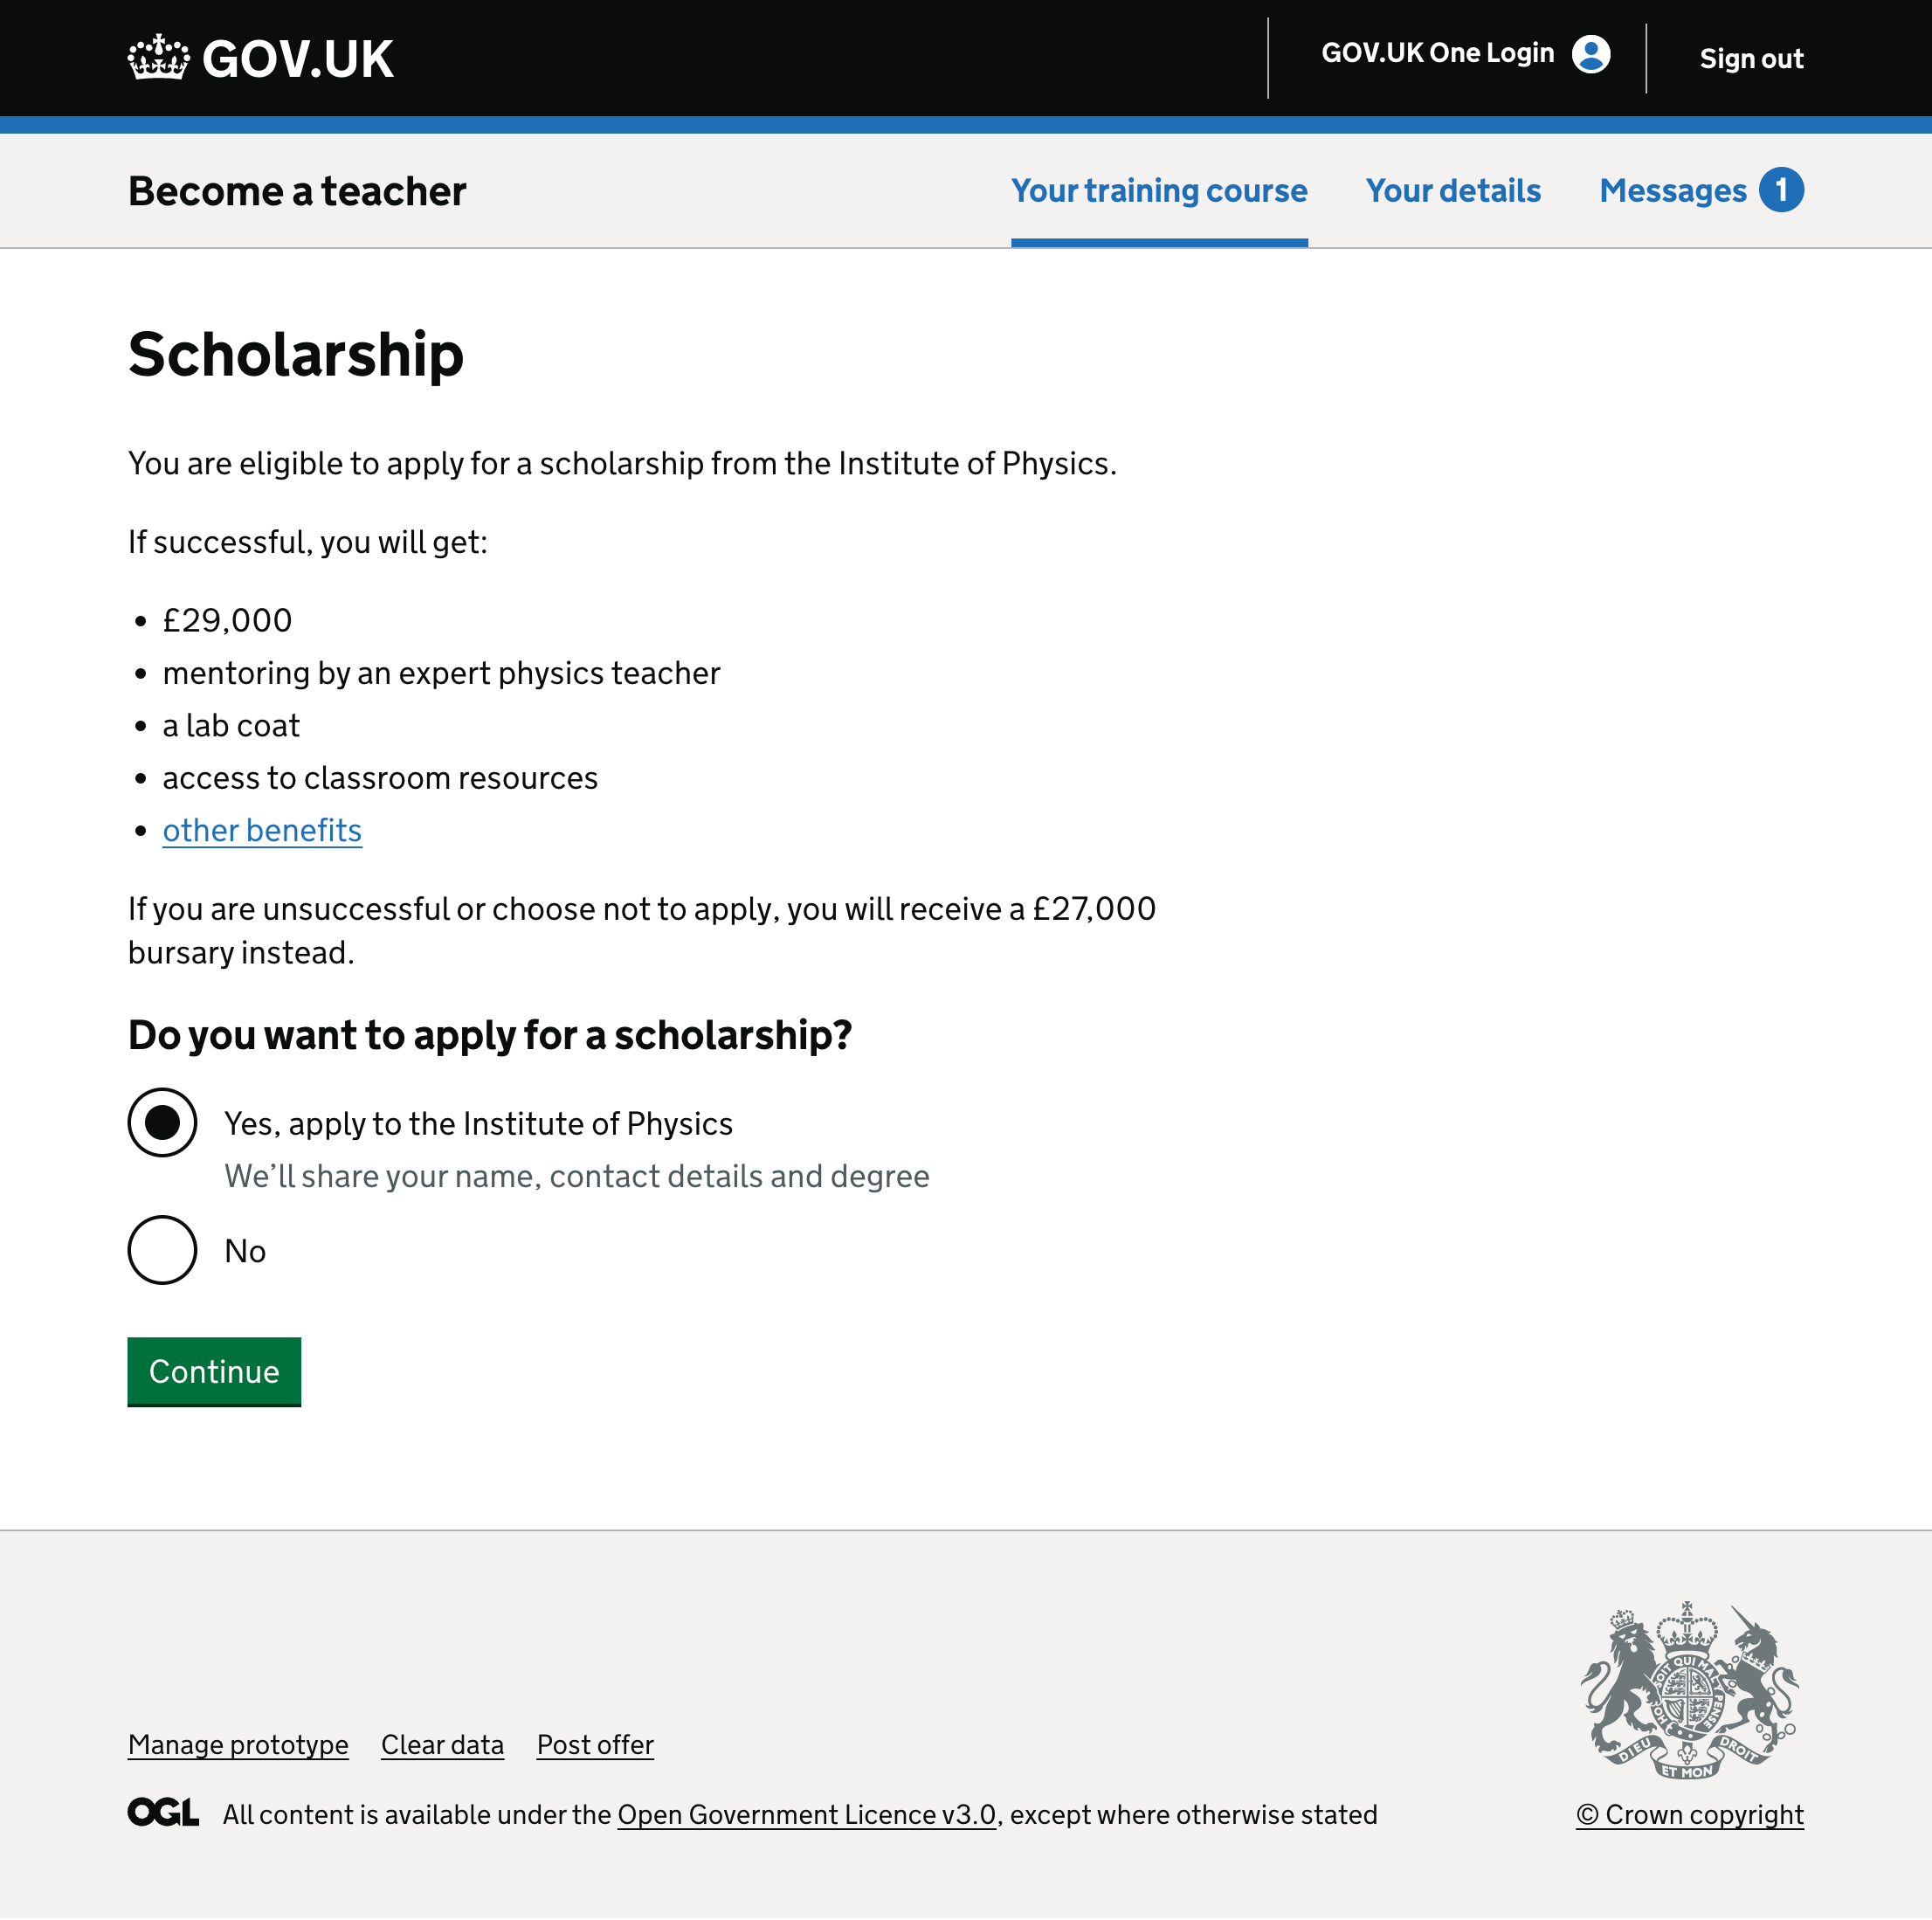 Screenshot showing a page inviting candidates to apply for a scholarship